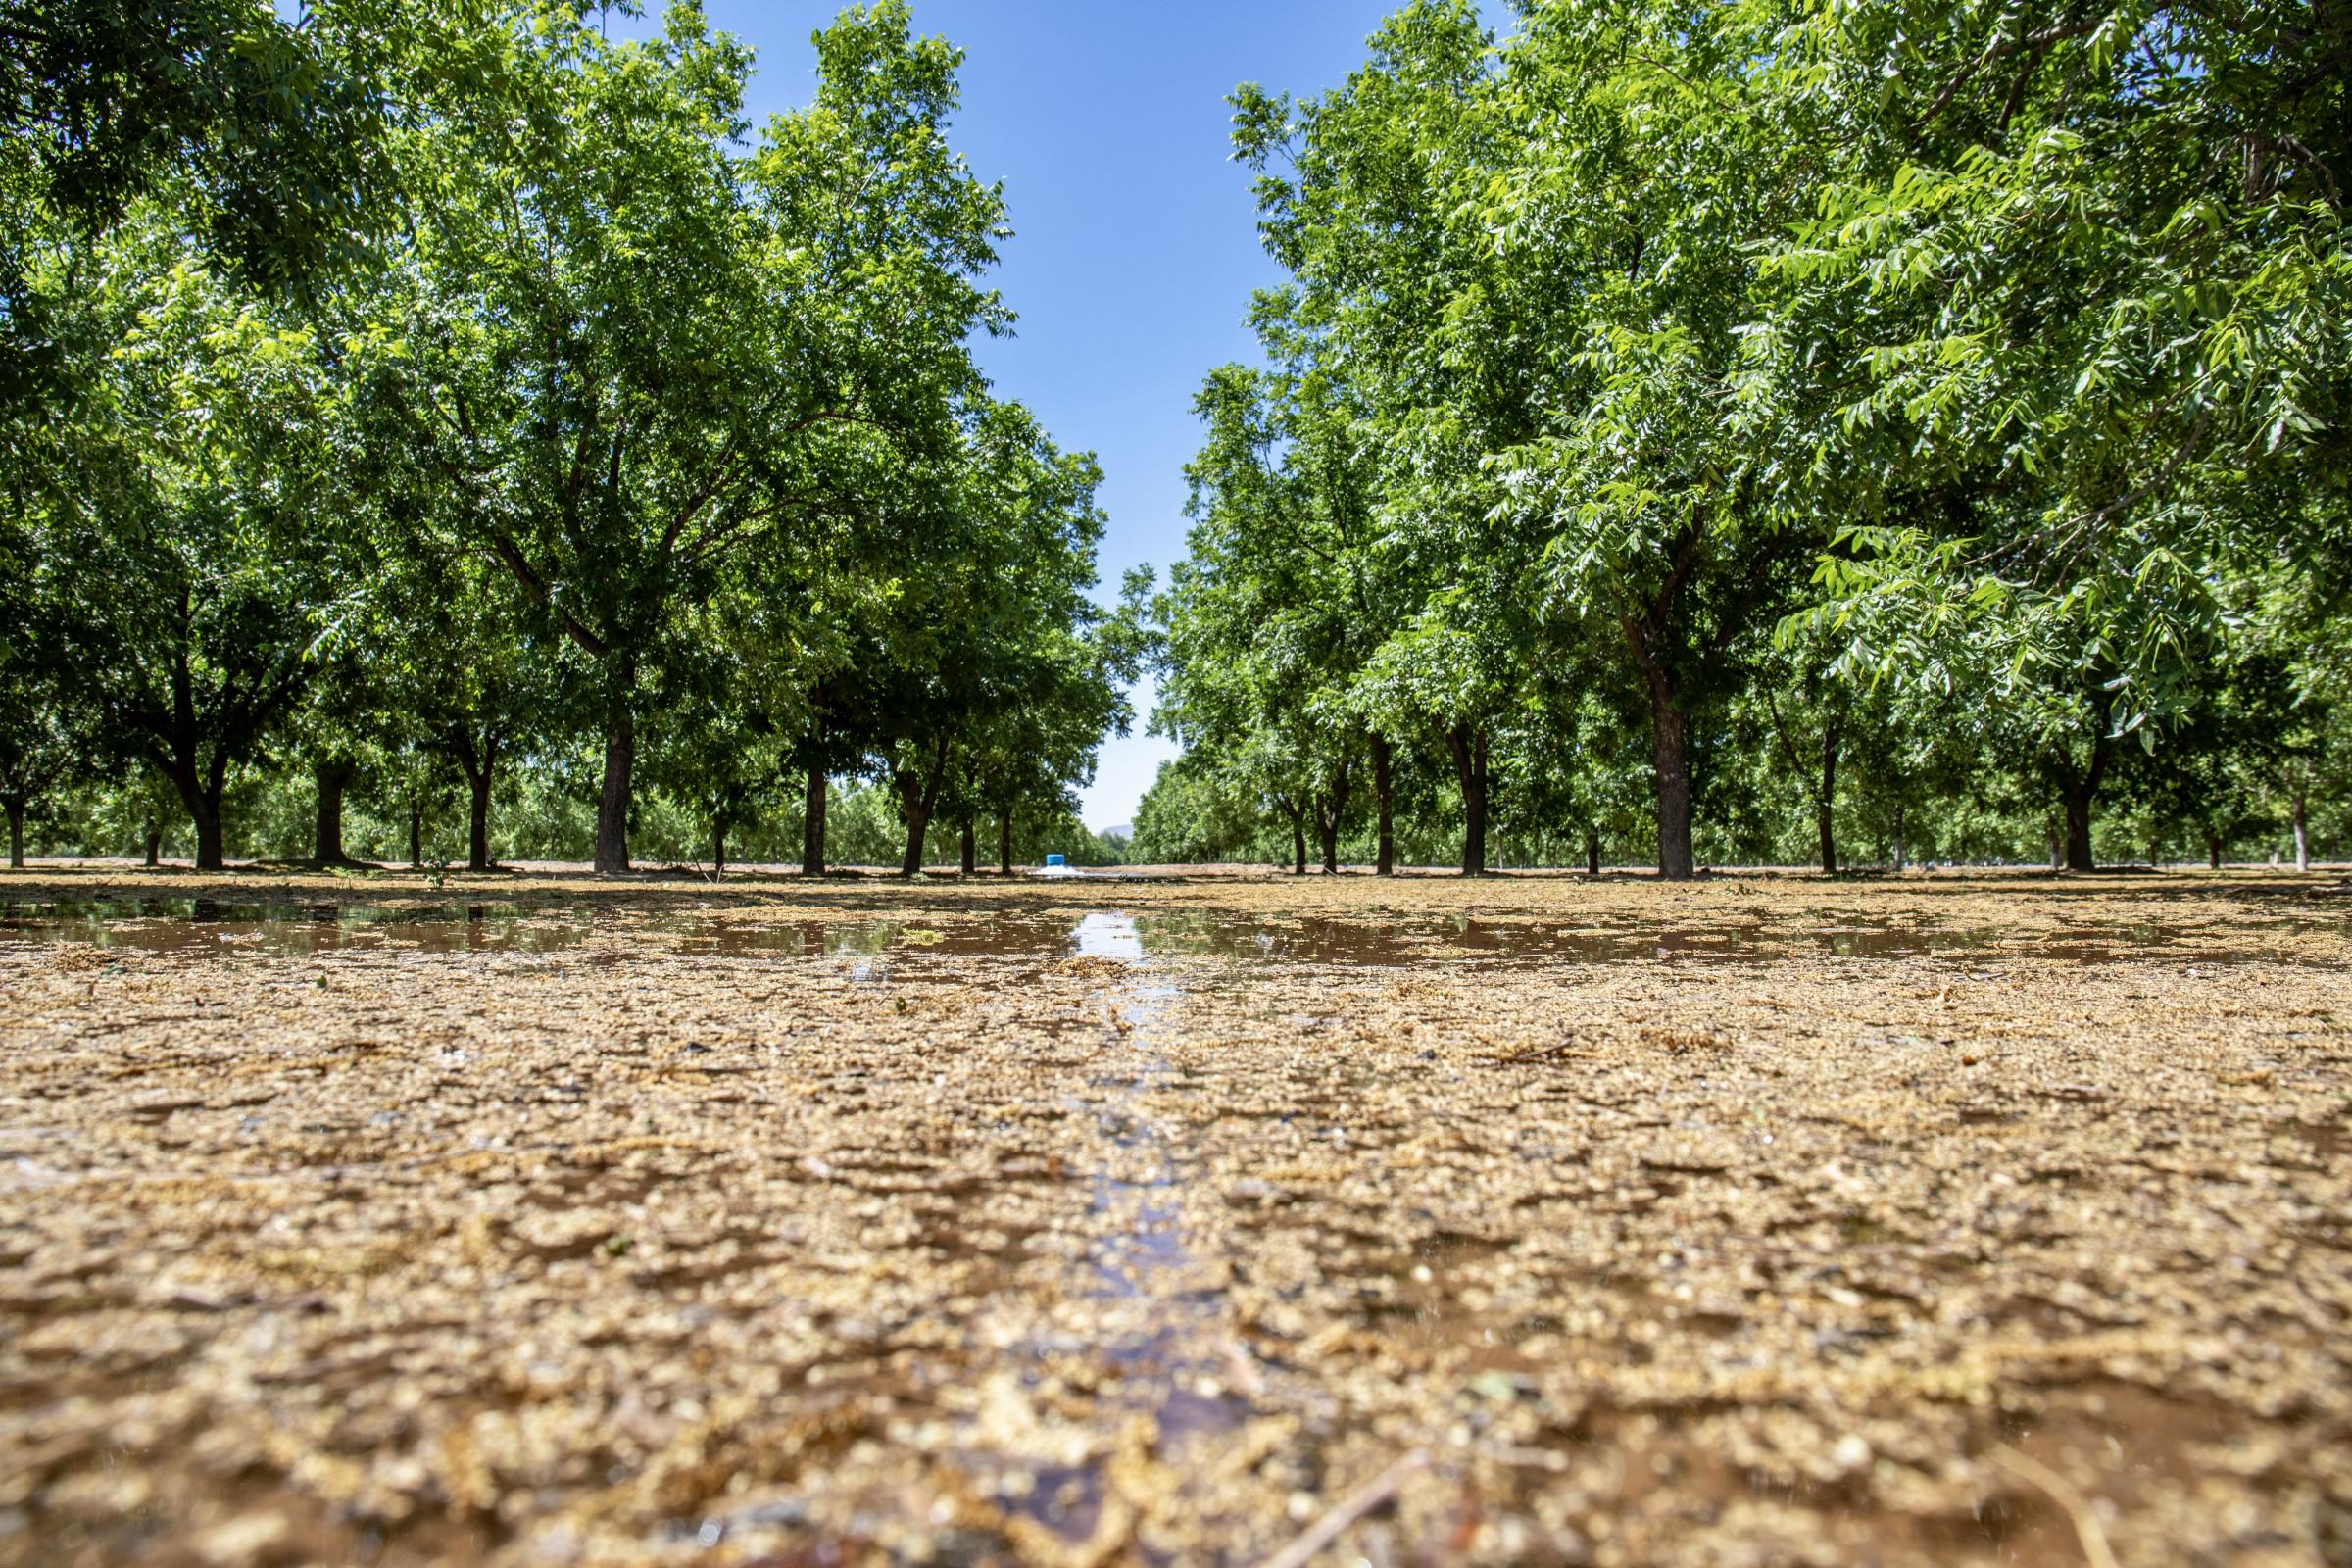 Crisis on the Rio Grande - Irrigation water sinks into pecan groves on the Texas-New Mexico border. Farmers in the region...